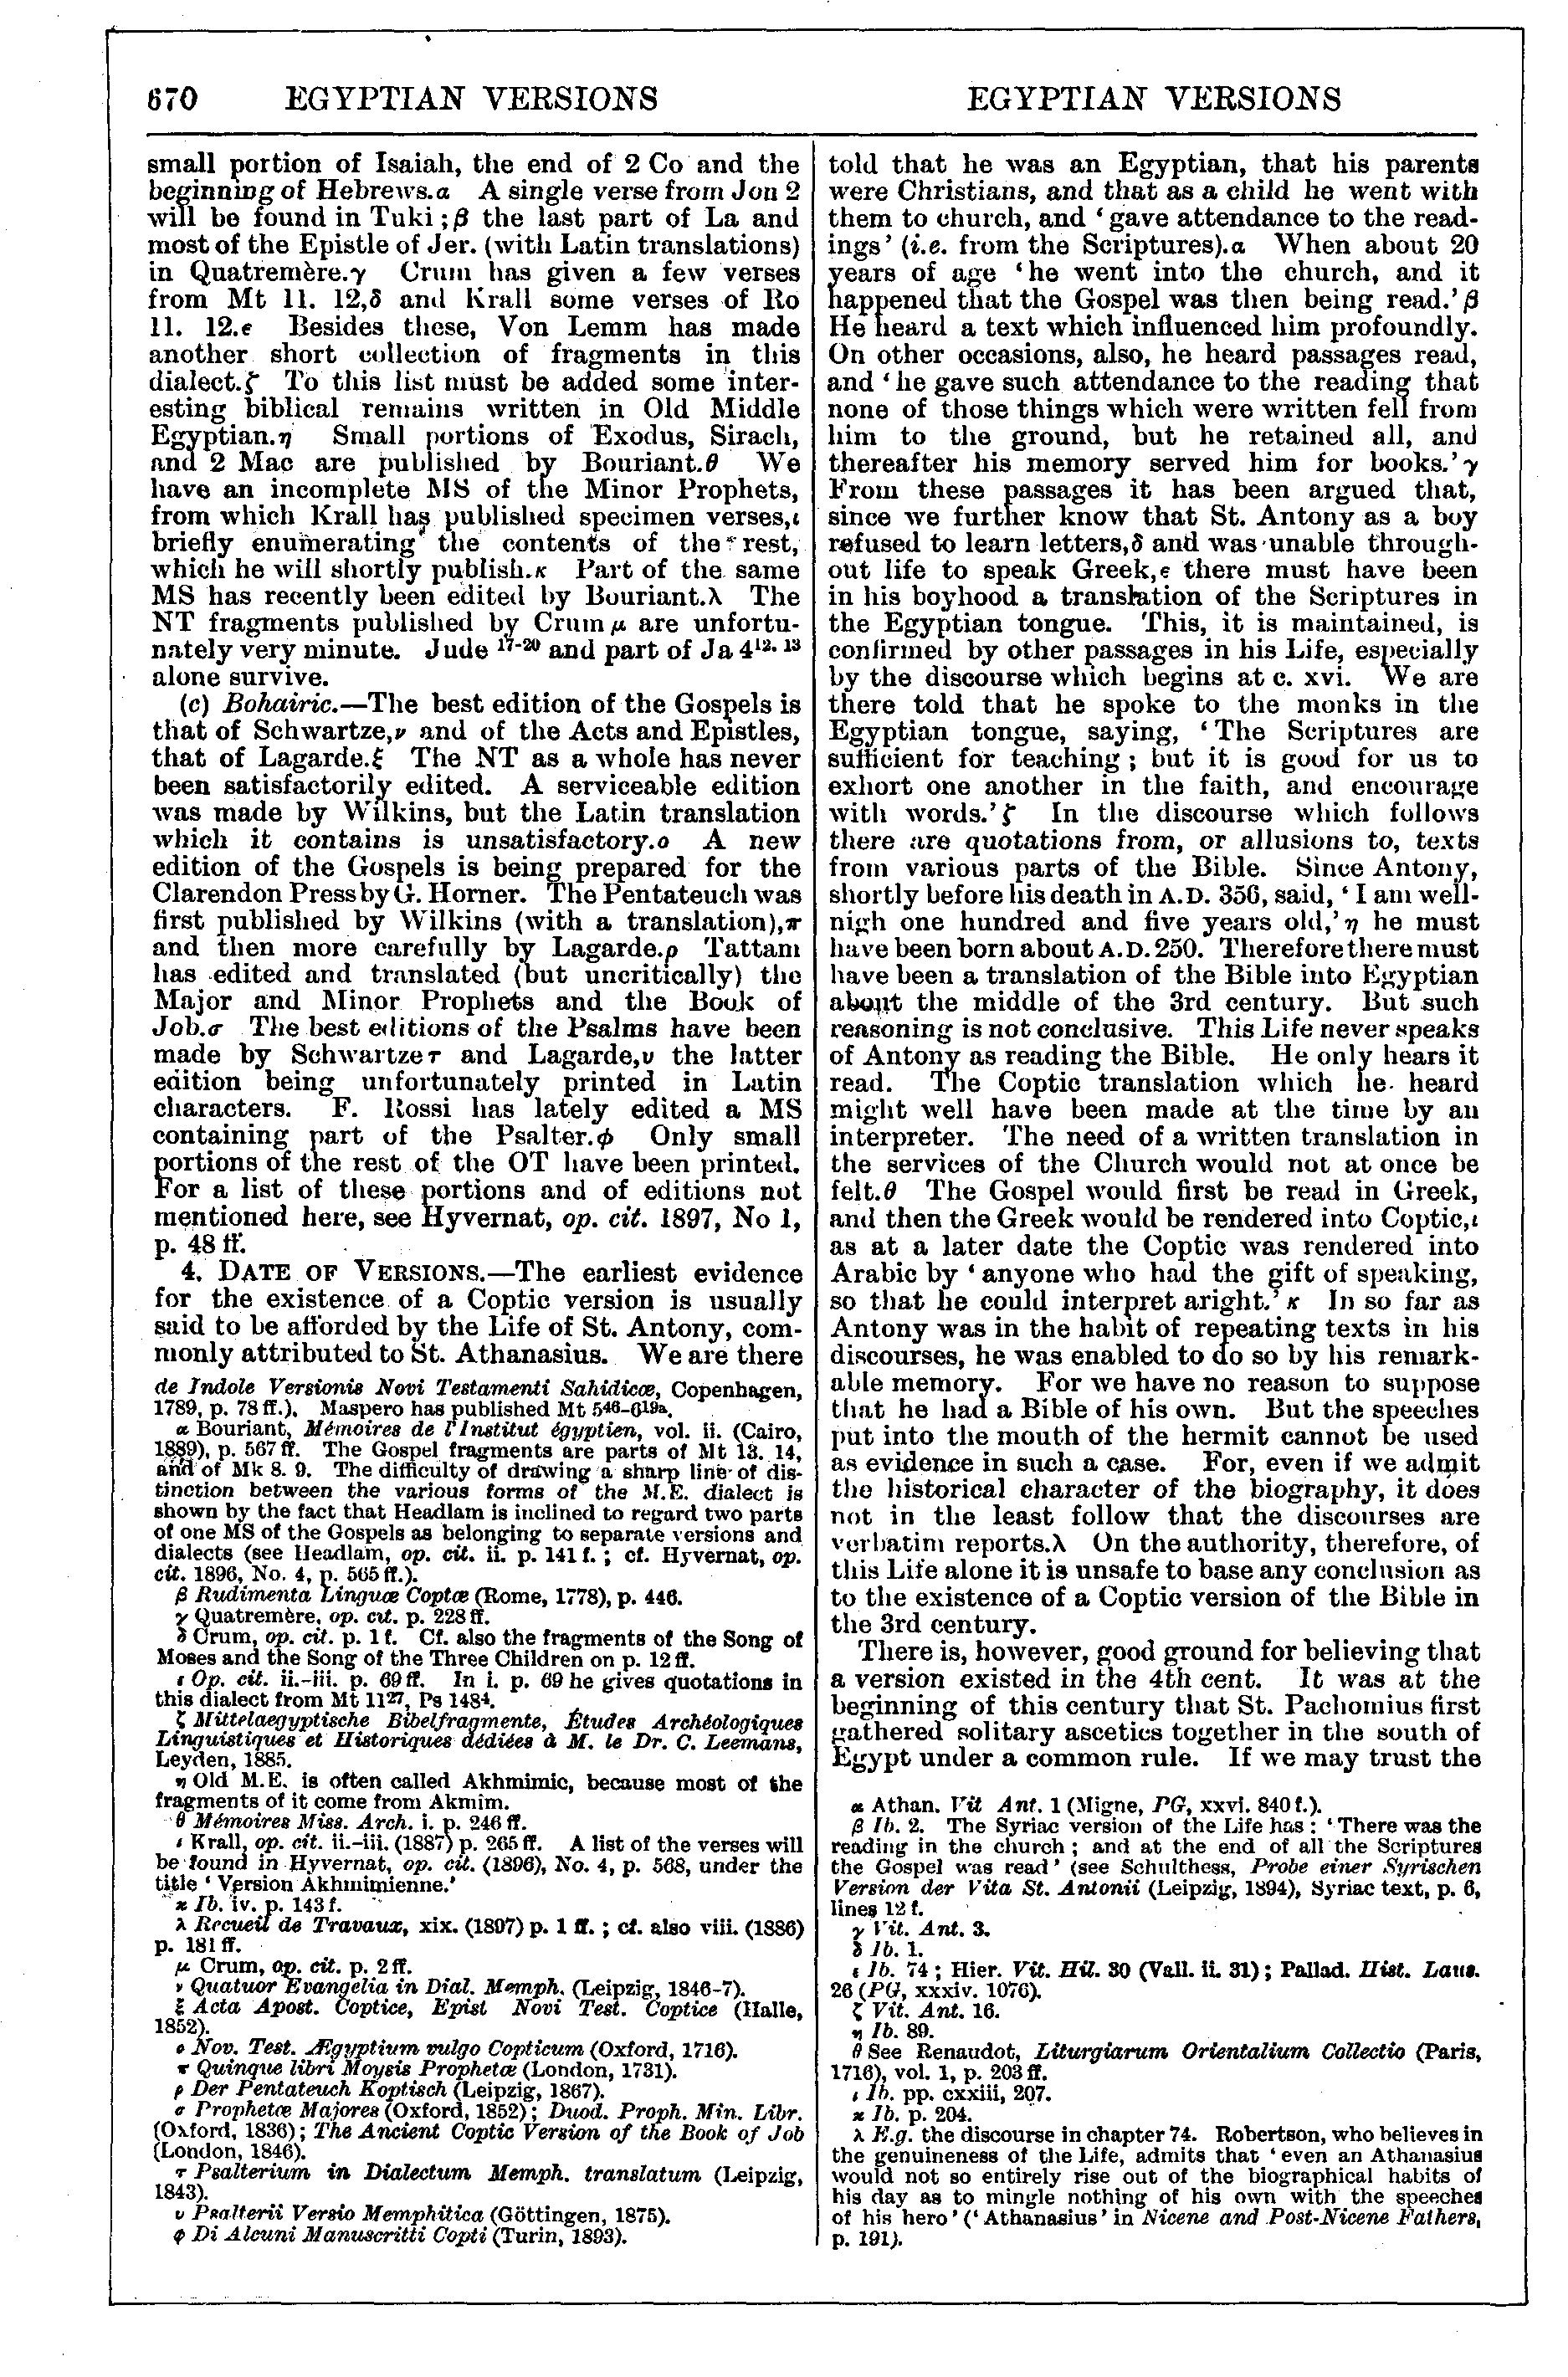 Image of page 670